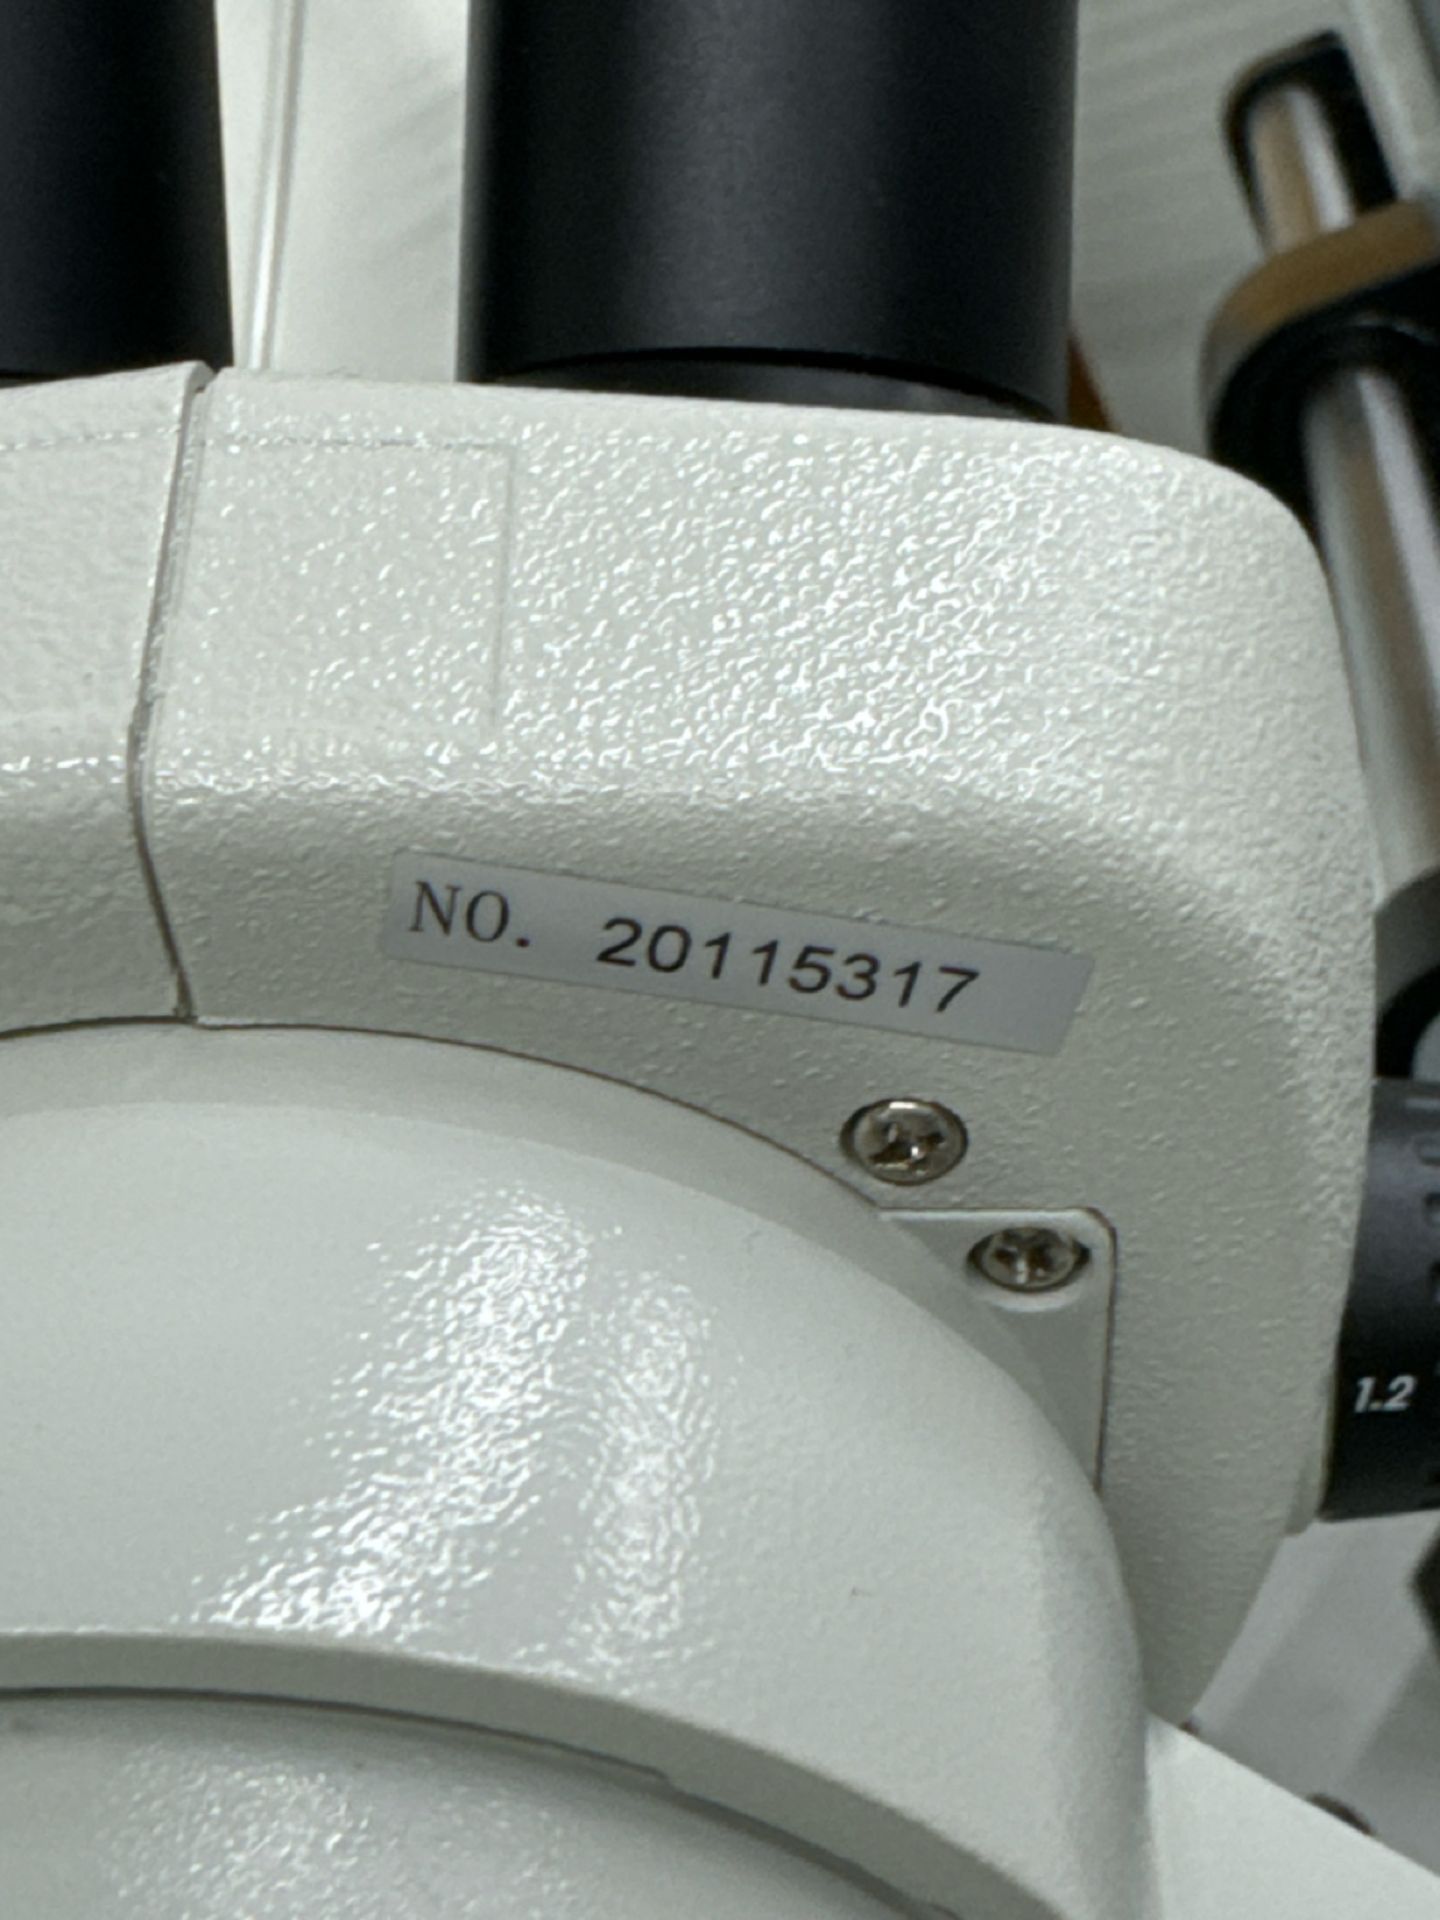 Vision Microscope - Image 6 of 6